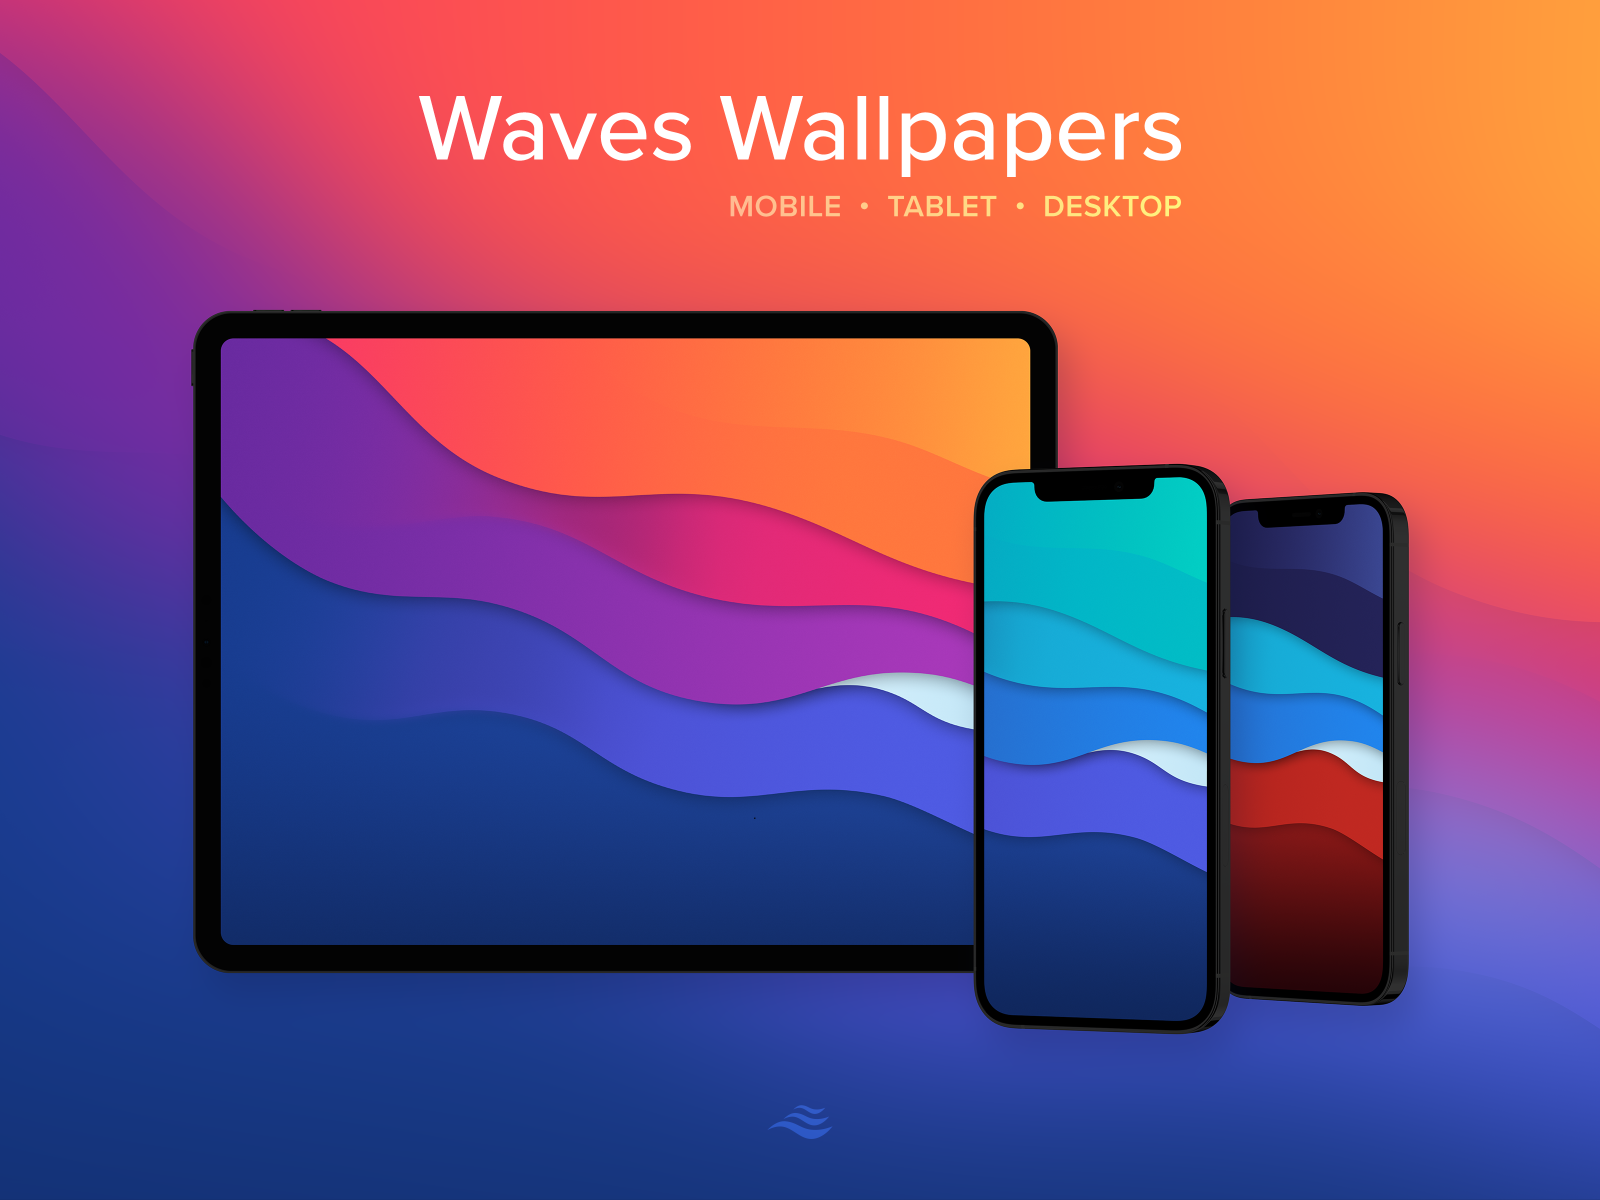 Wallpaper Themes 61 images